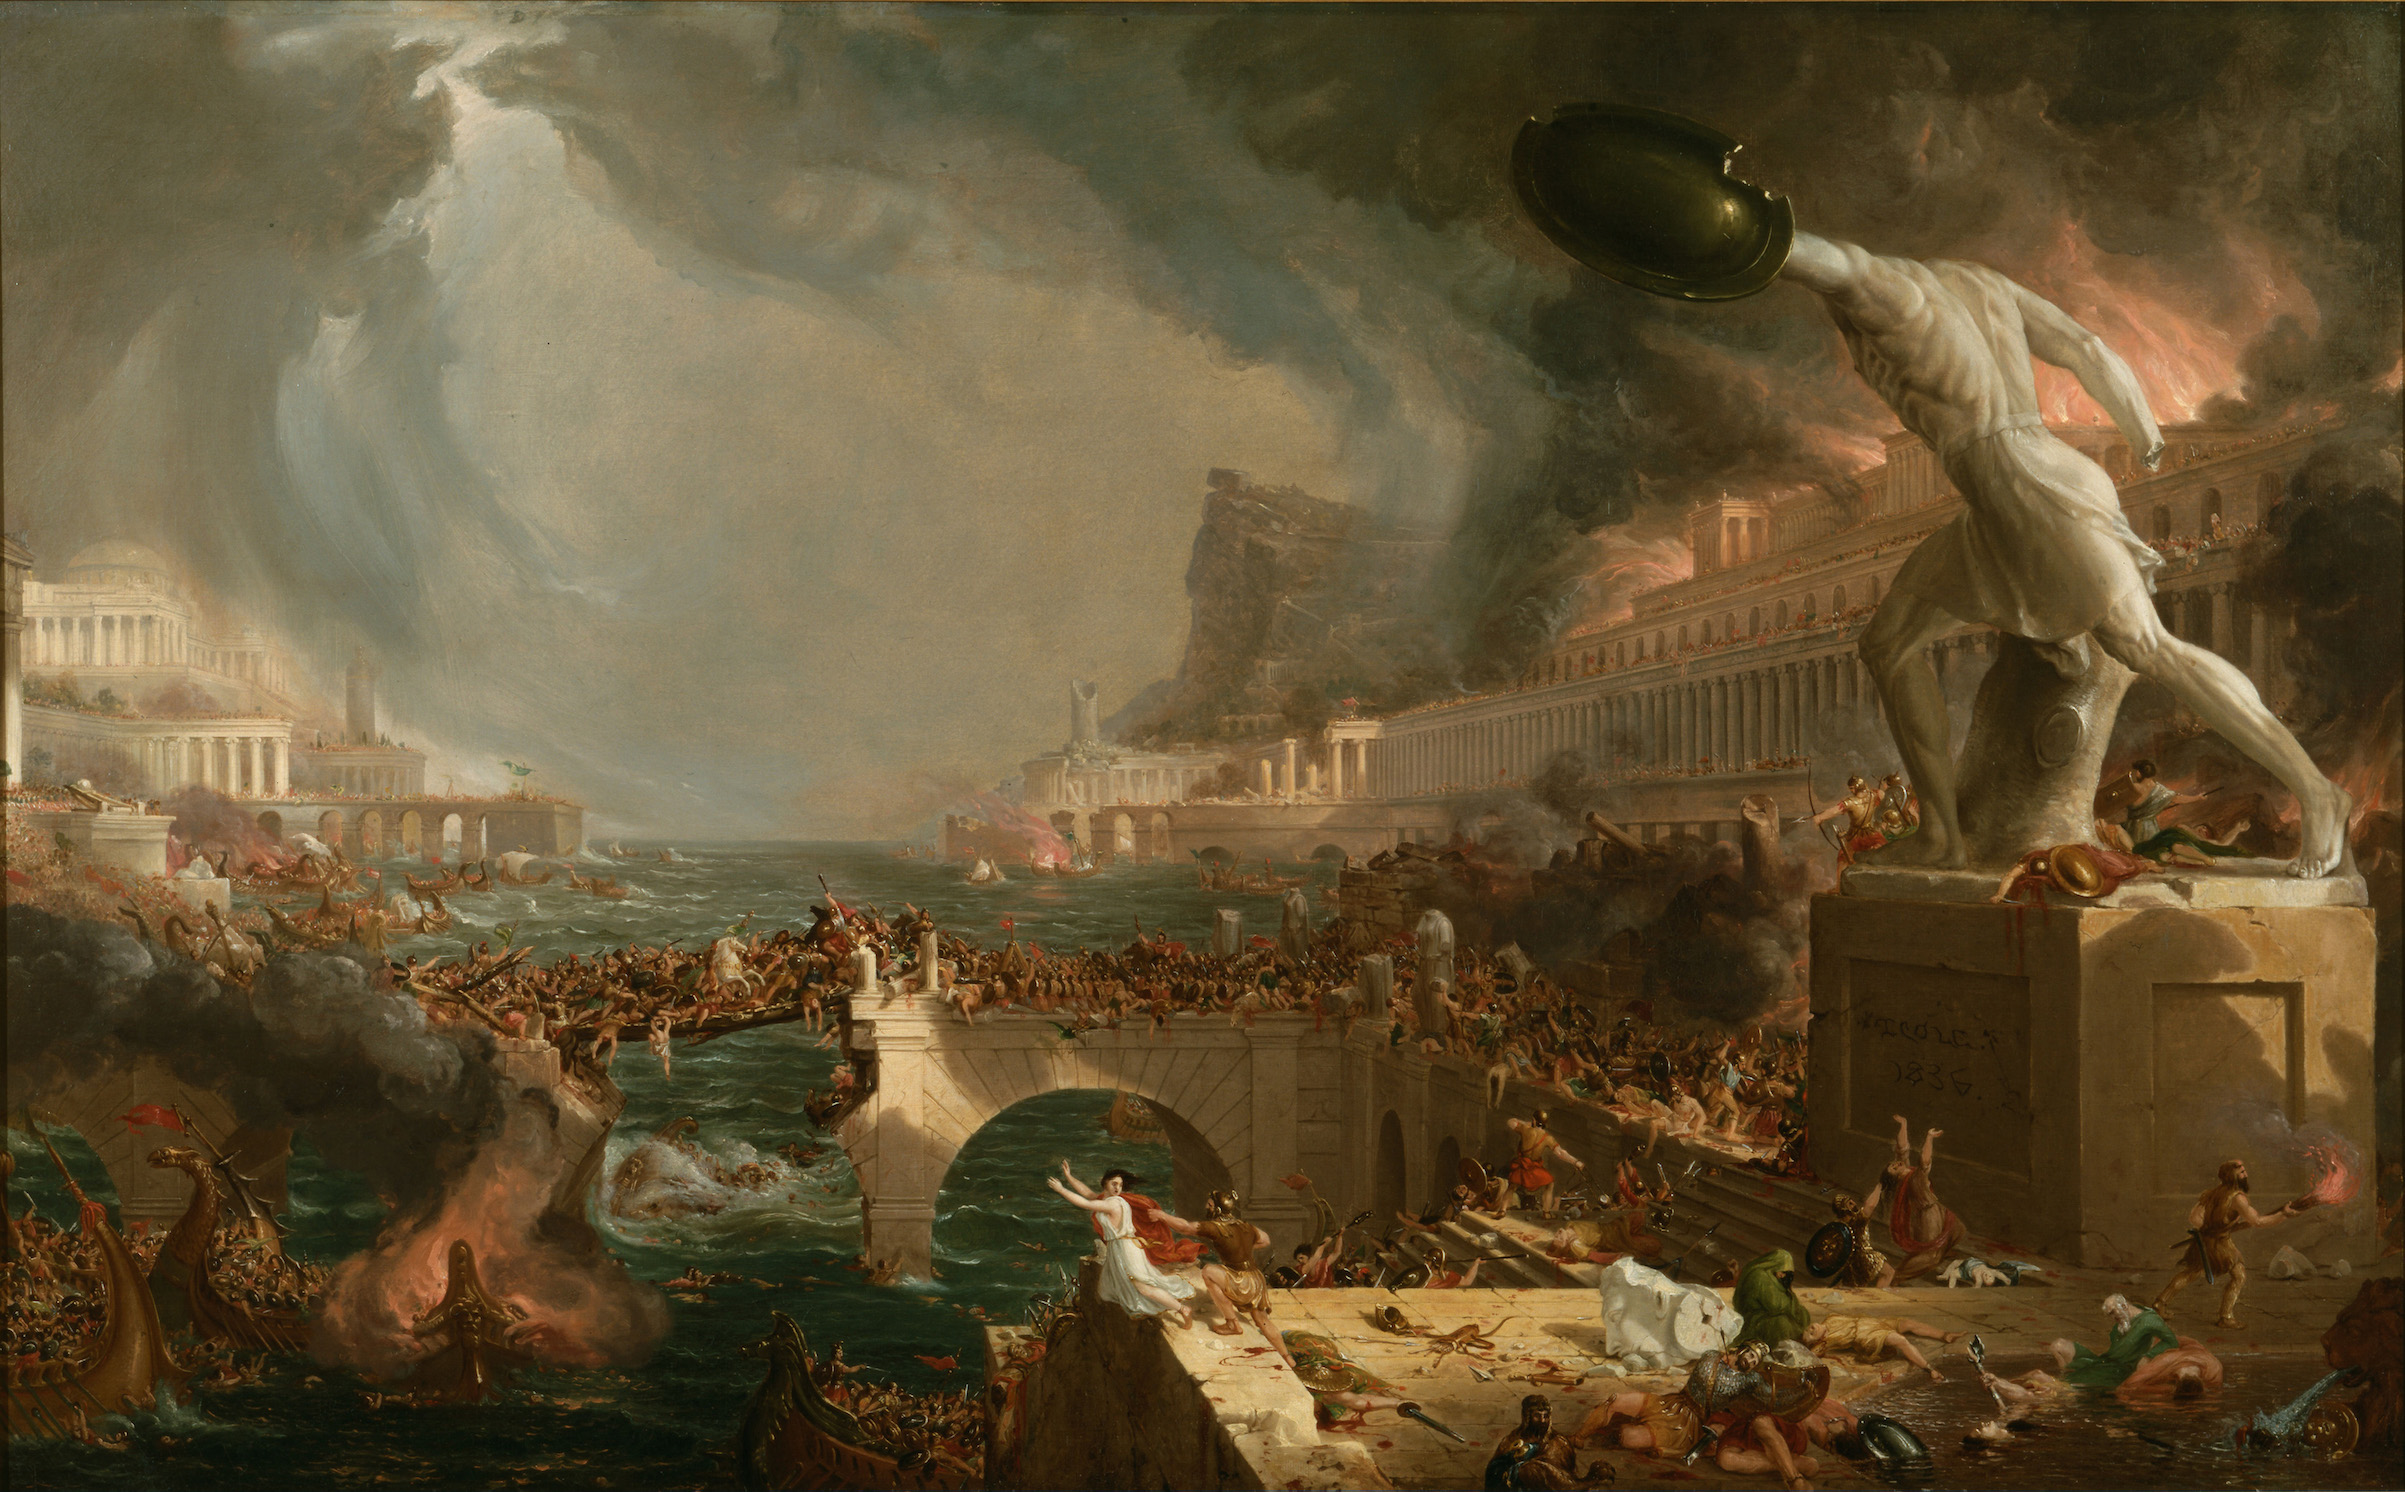 The Course of Empire: Destruction, 1836, by Thomas Cole. Found in the collection of the New-York Historical Society. (Heritage Images/Getty Images)